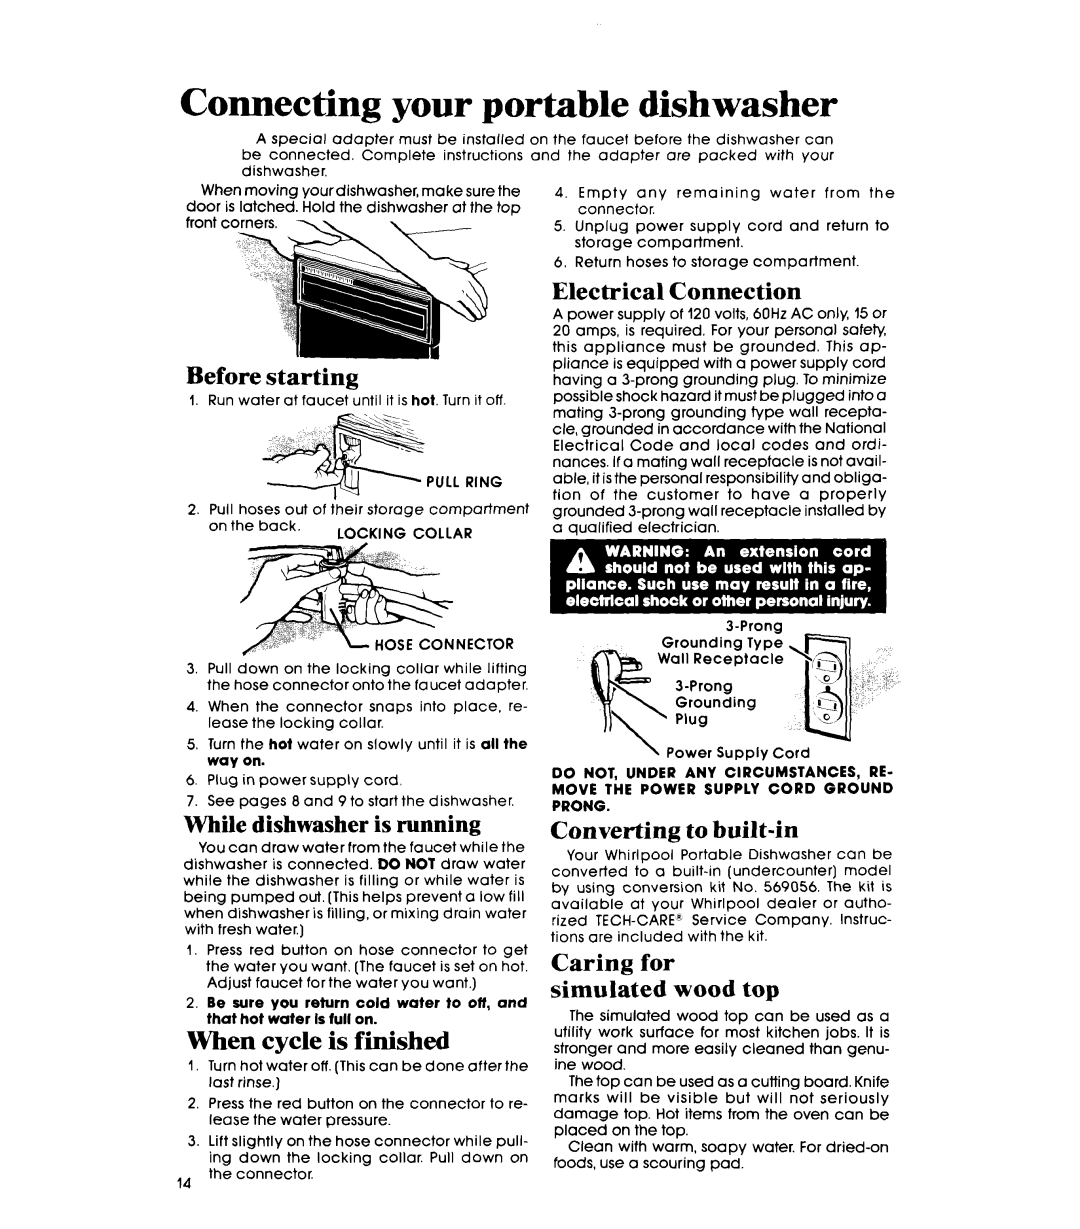 Whirlpool DP3000XR Series manual Connecting your portable dishwasher, When cycle is finished, Before starting 